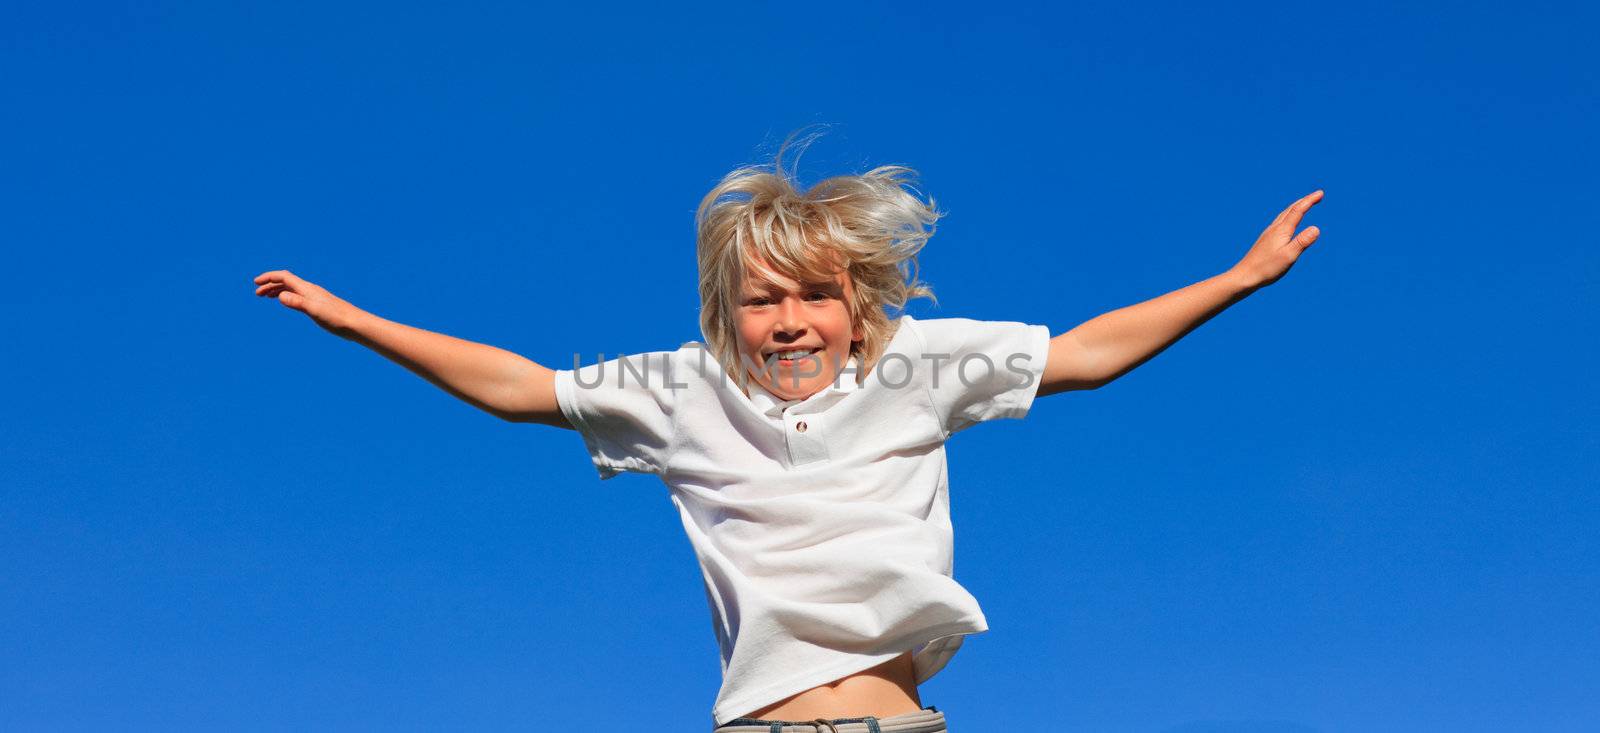 Young kid Jumping in the air against thr blue sky